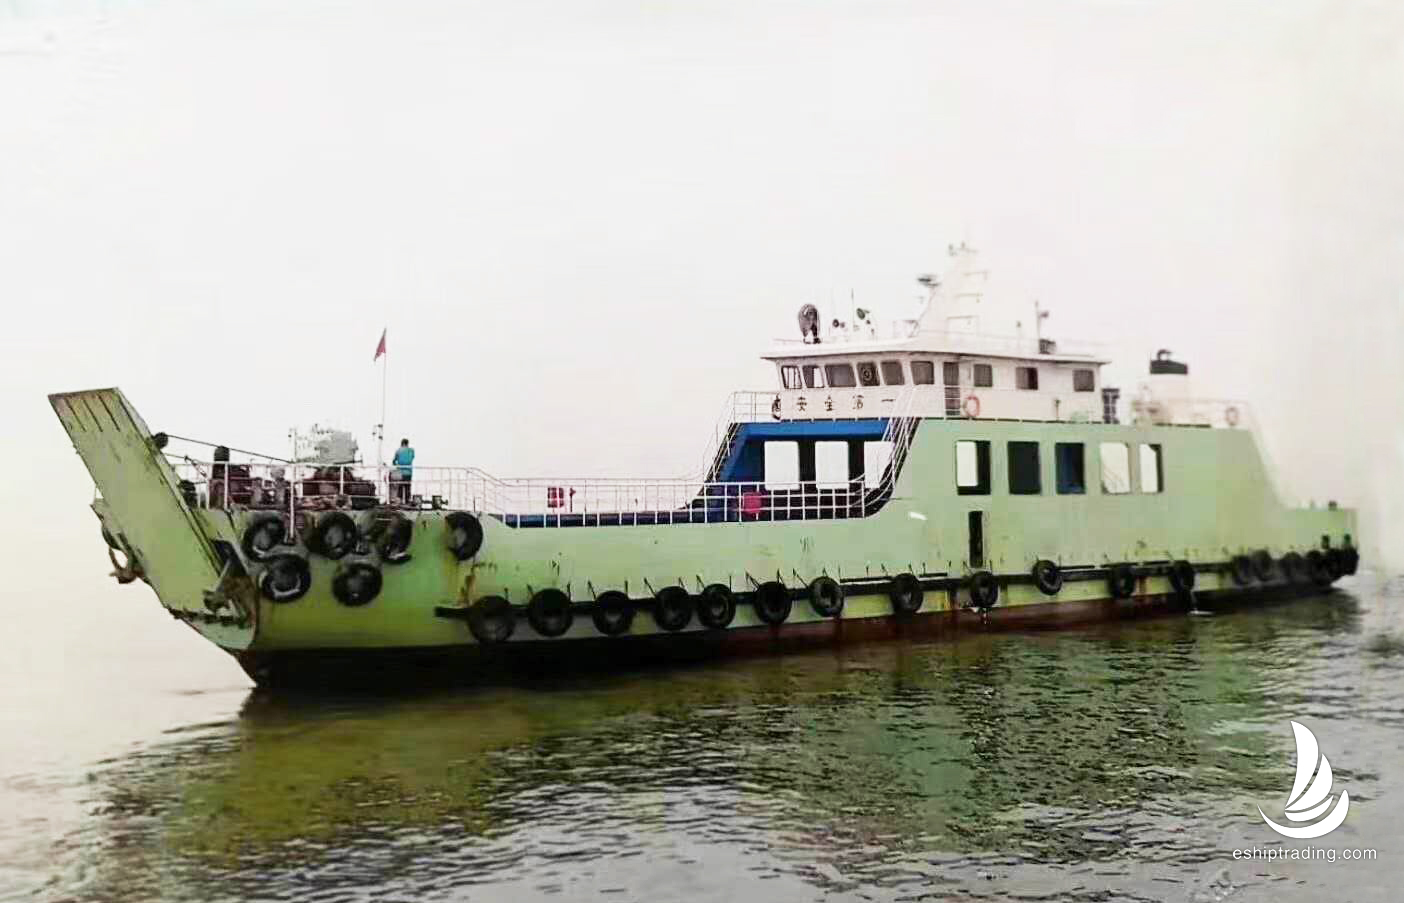 210t Ro-Pax/Ferry For Sale